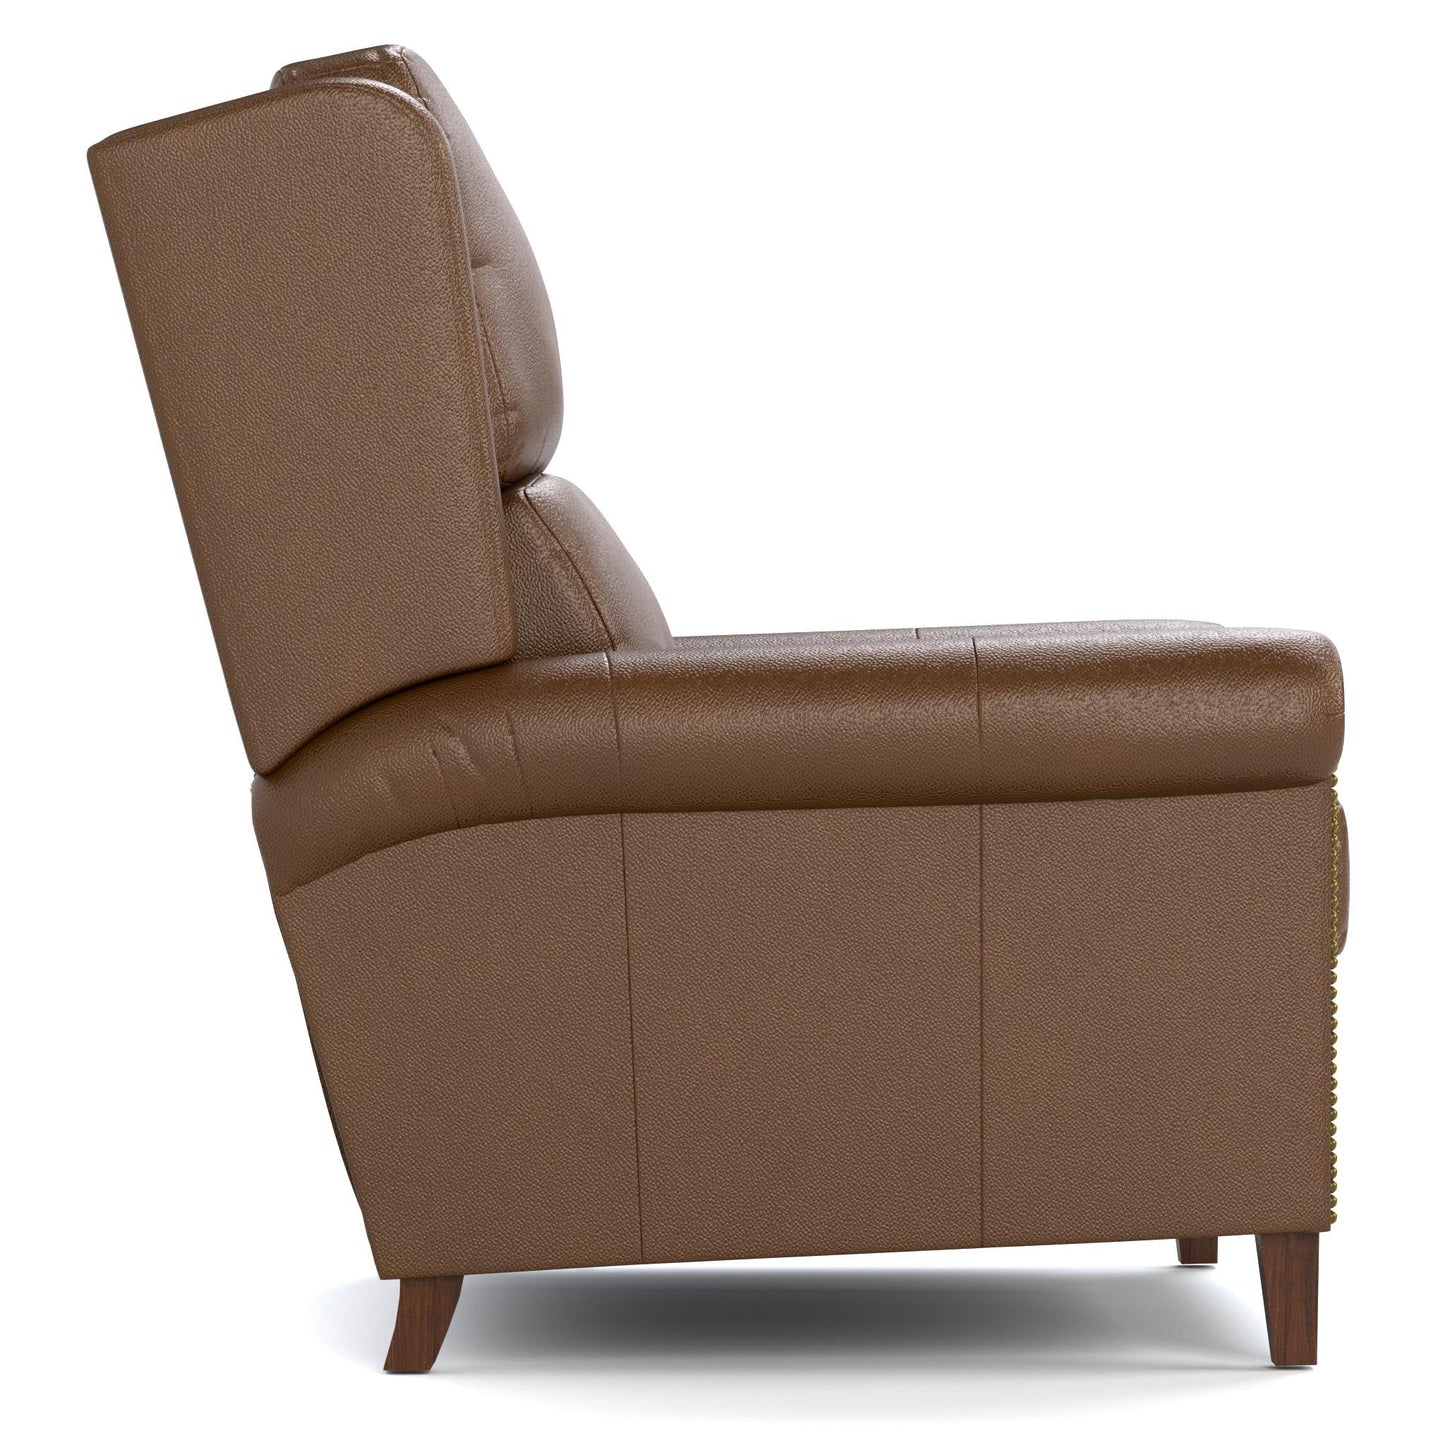 Woodlands Small Roll Arm Manual Recliner with Nails Selvano Bark - Side